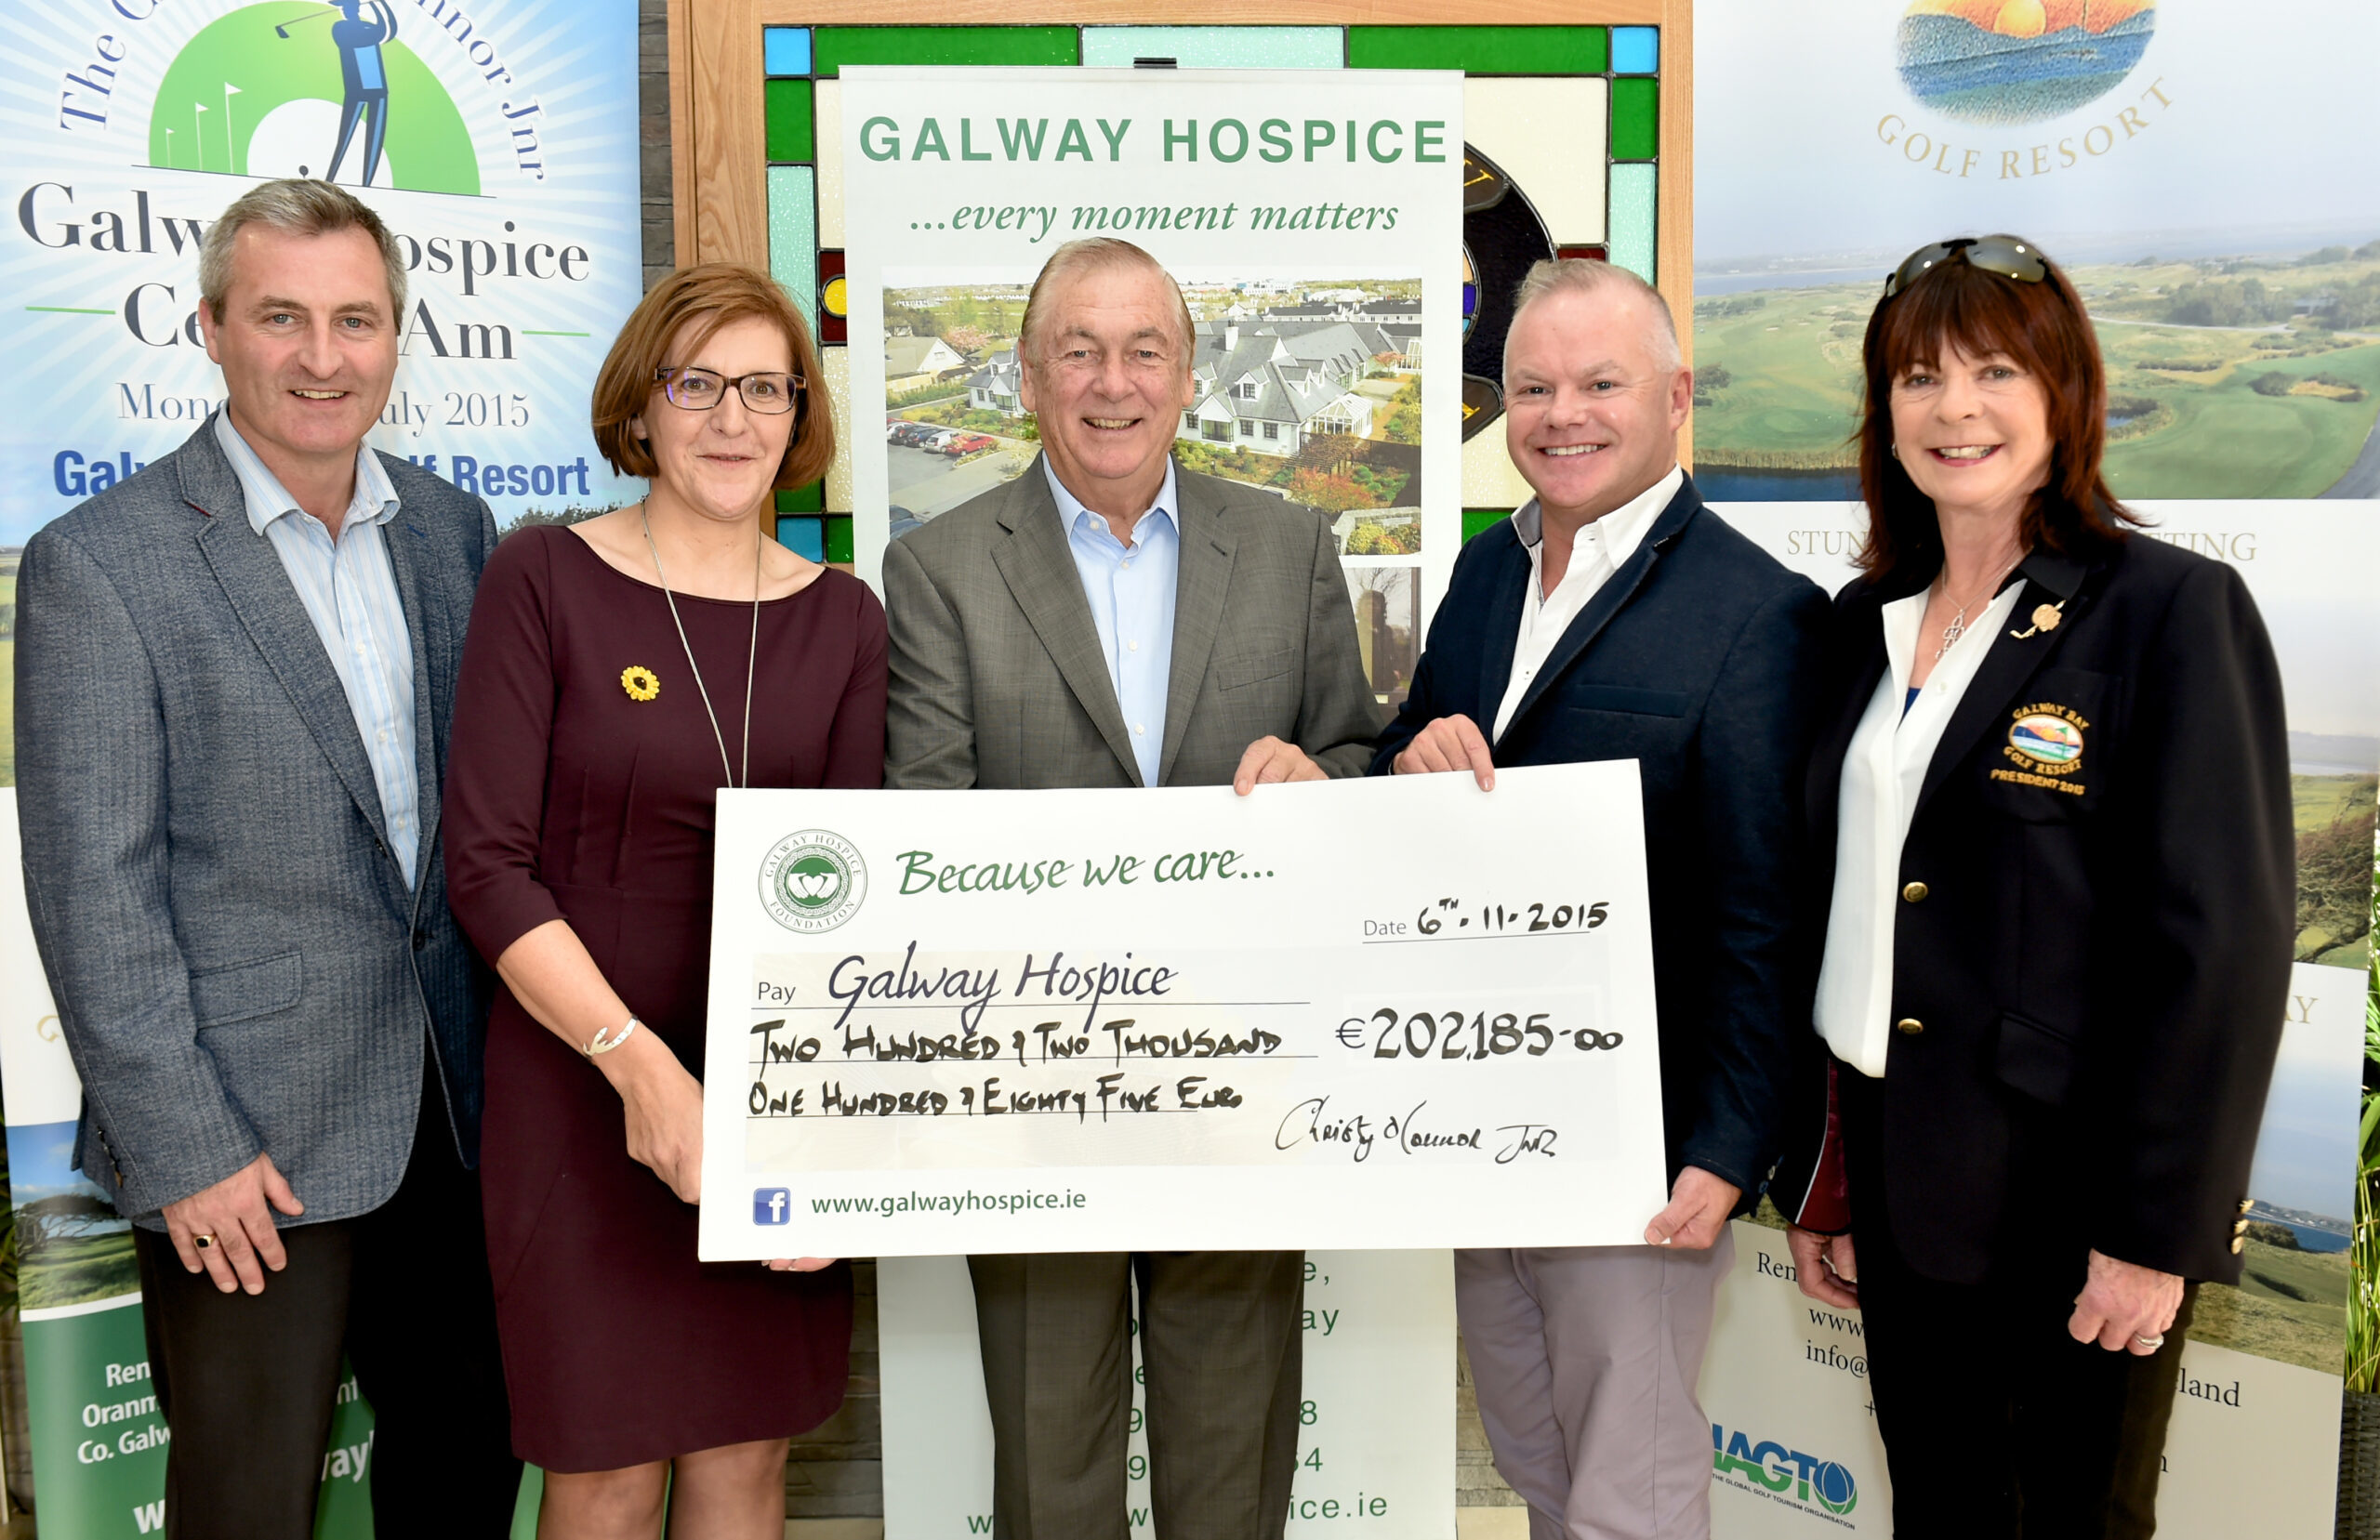 Ronan Killeen, Director Galway Bay Golf Resort, Mary Nash, CEO Galway Hospice, Christy O'Connor Jnr, Michael Craig, Galway Hospice & Bernie O'Grady, Galway Bay Golf Resort Lady Captain with a cheque from the proceeds of Christy O'Connor Jnr Galway Hospice Celeb Am-Am Golf tournament held at the Galway Bay Golf Resort recently. Photo: Joe Travers